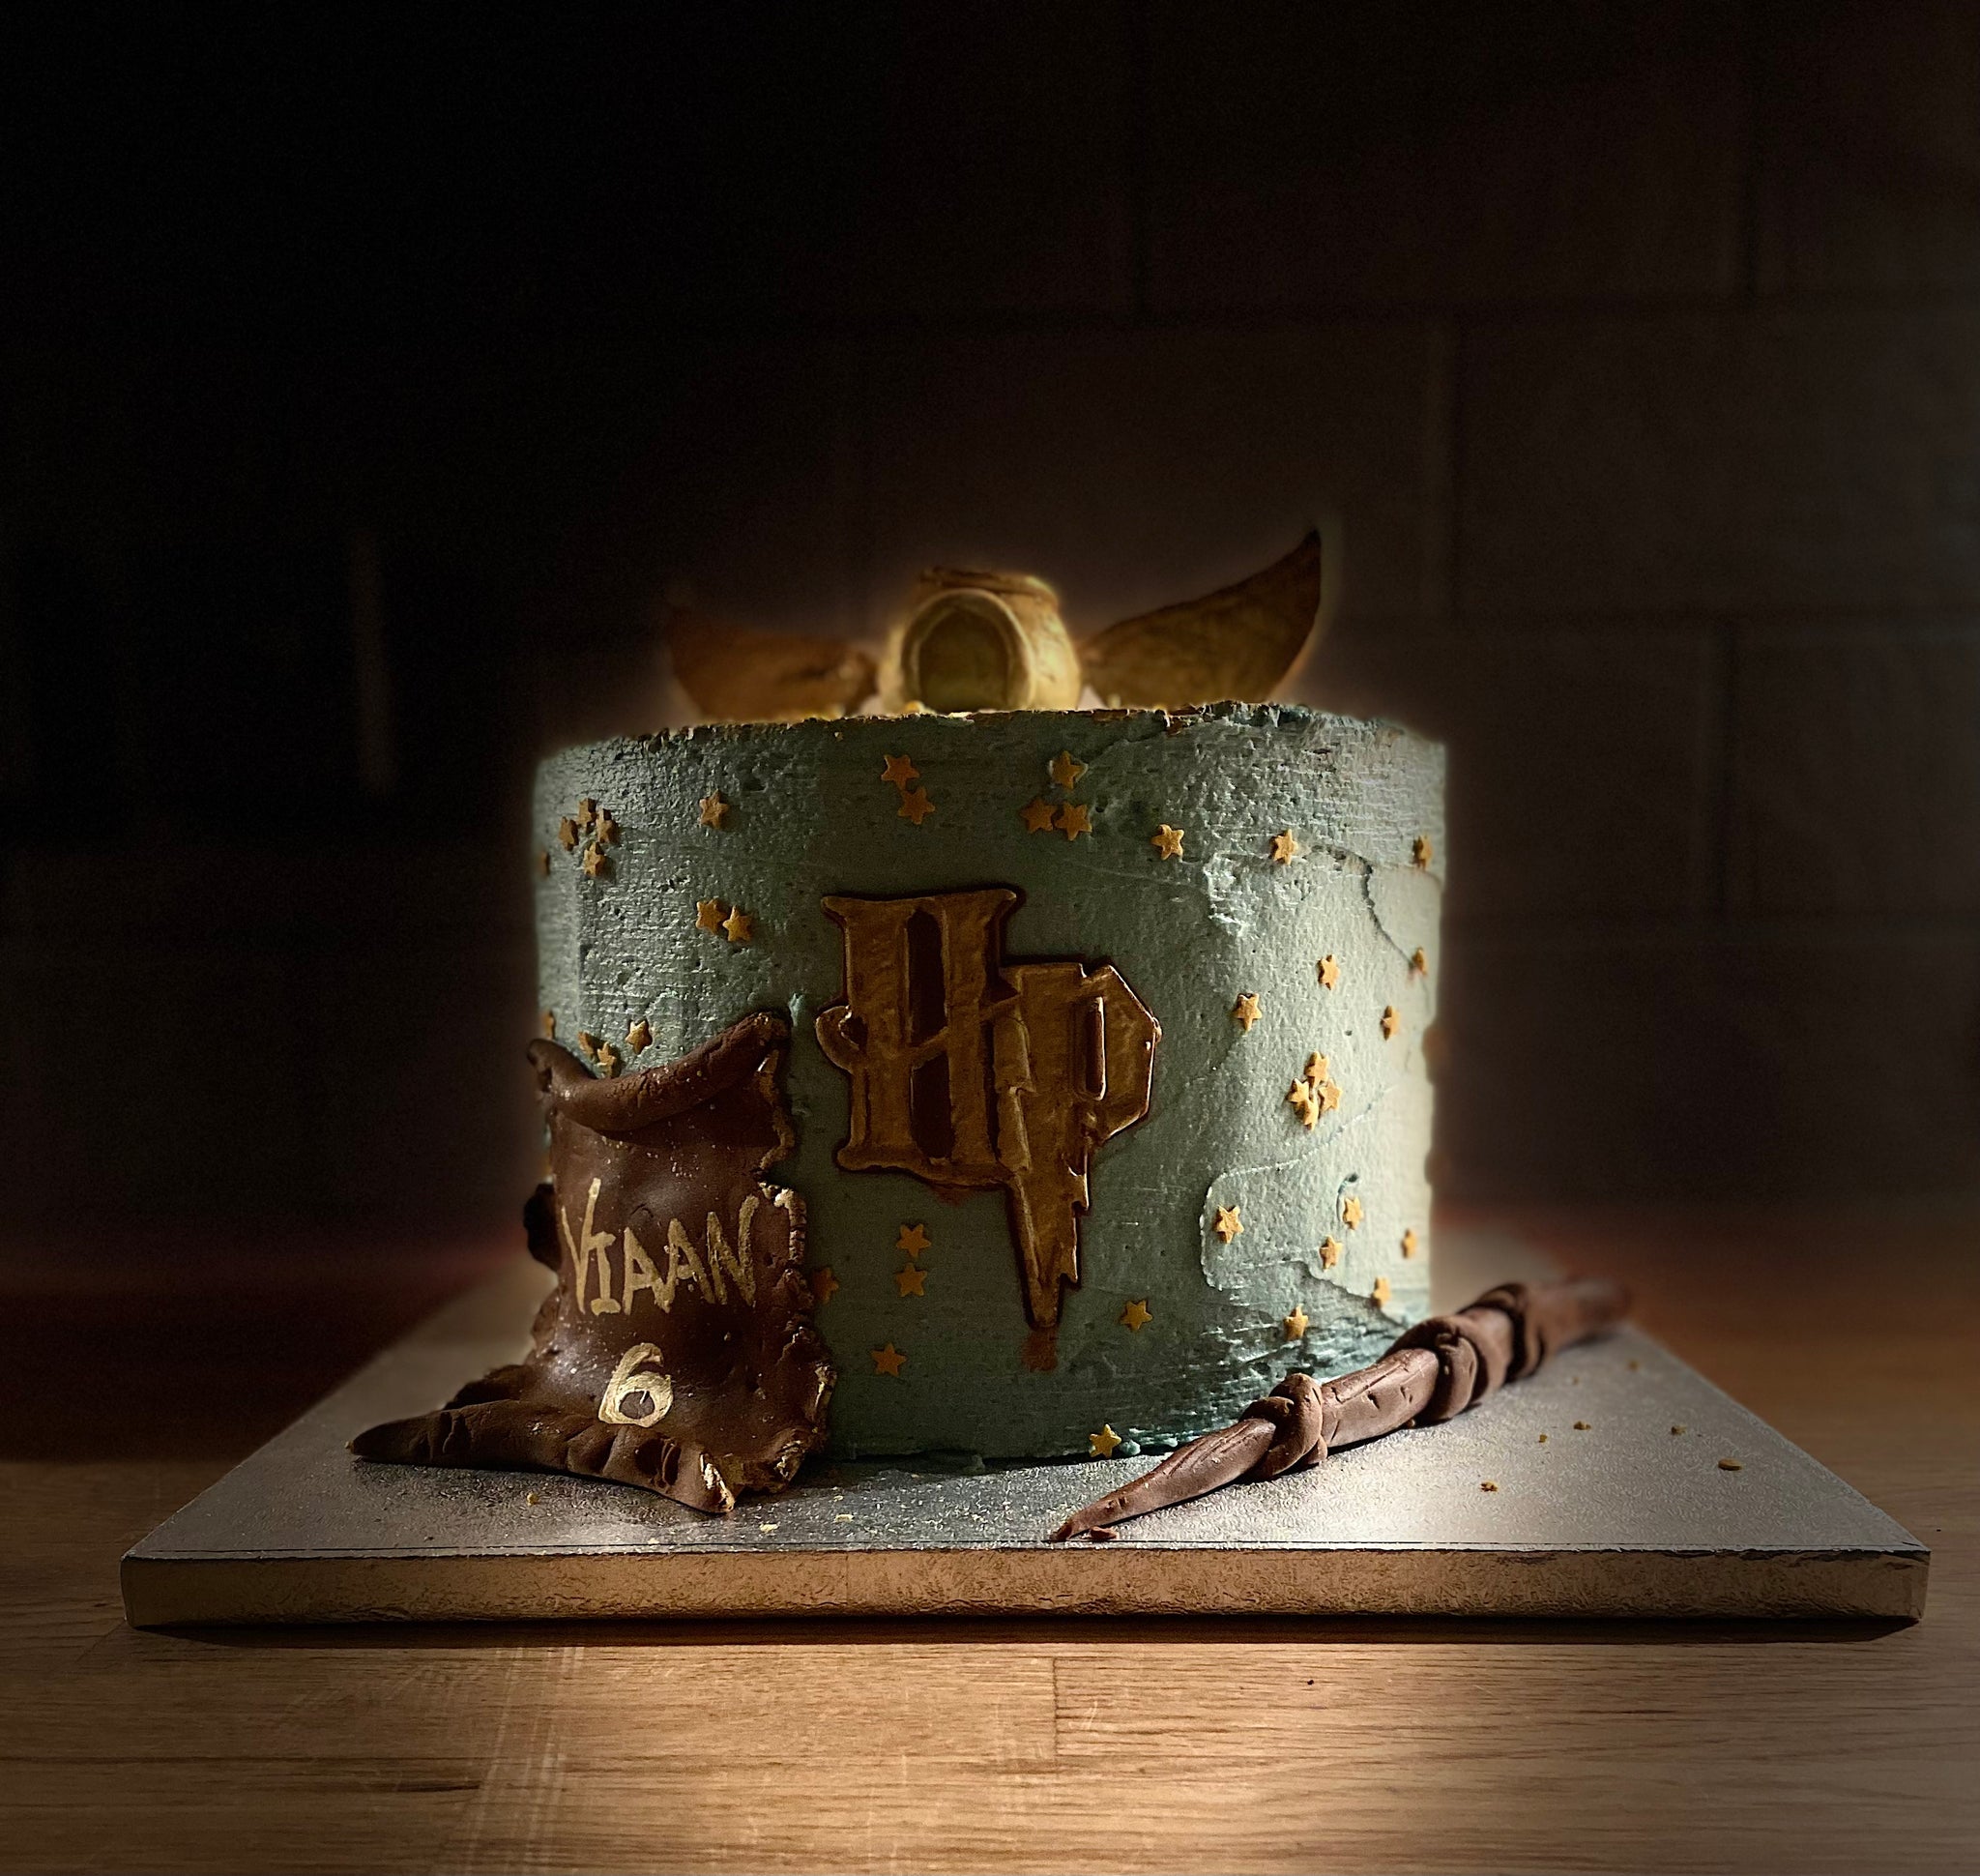 Harry Potter Themed cake - please click here for more options